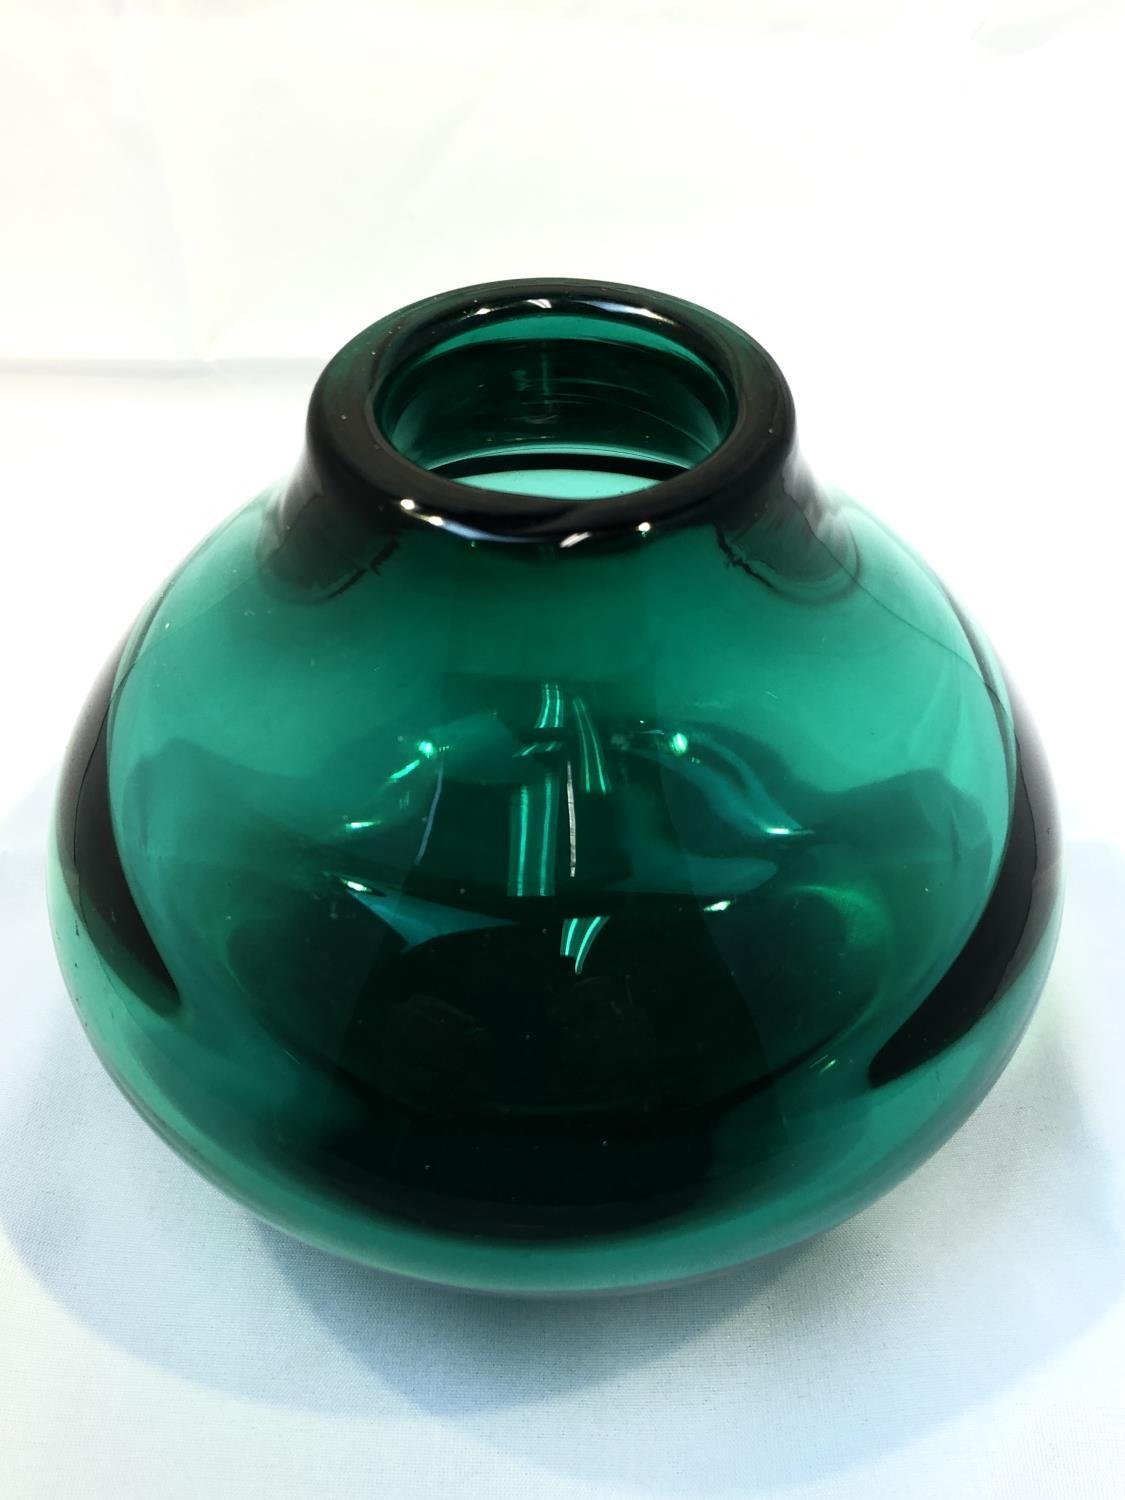 Geoffrey Baxter for Whitefriars - a 9493 arctic green glass vase with cut and polished neck, 24cm - Image 8 of 12